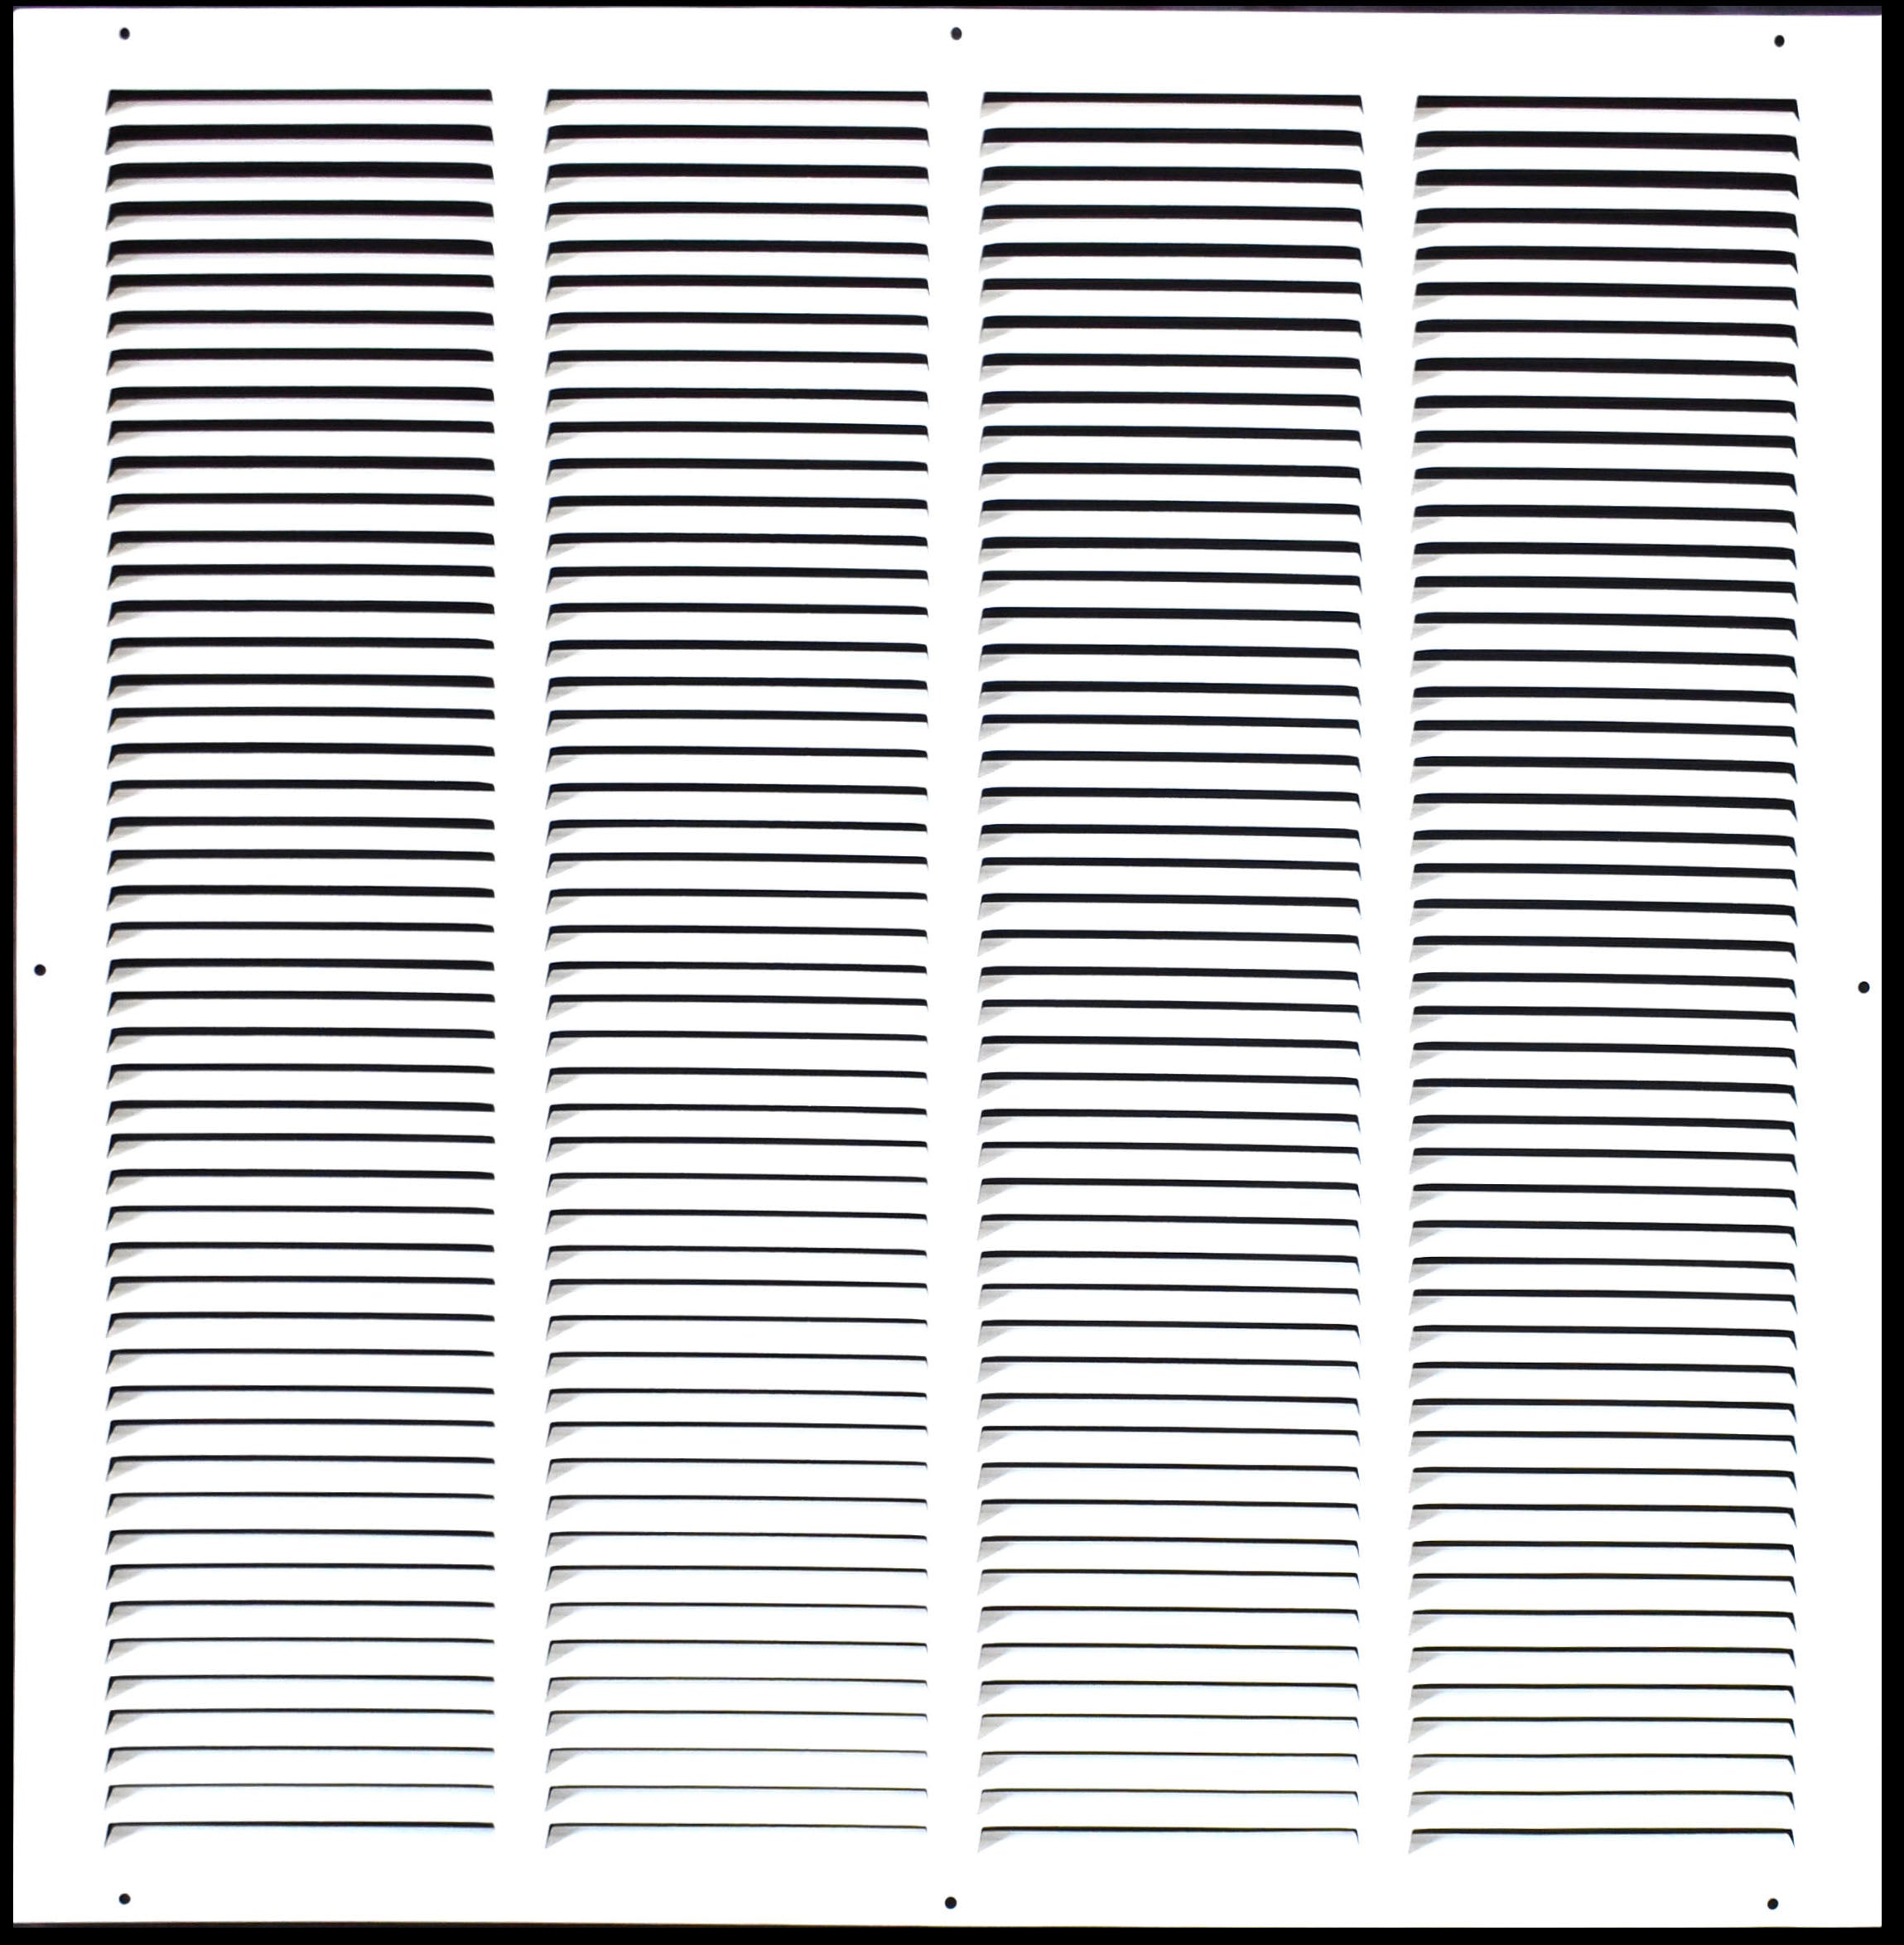 airgrilles 24" x 24" duct opening   hd steel return air grille for sidewall and ceiling 7hnd-flt-rg-wh-24x24 038775640473 - 1